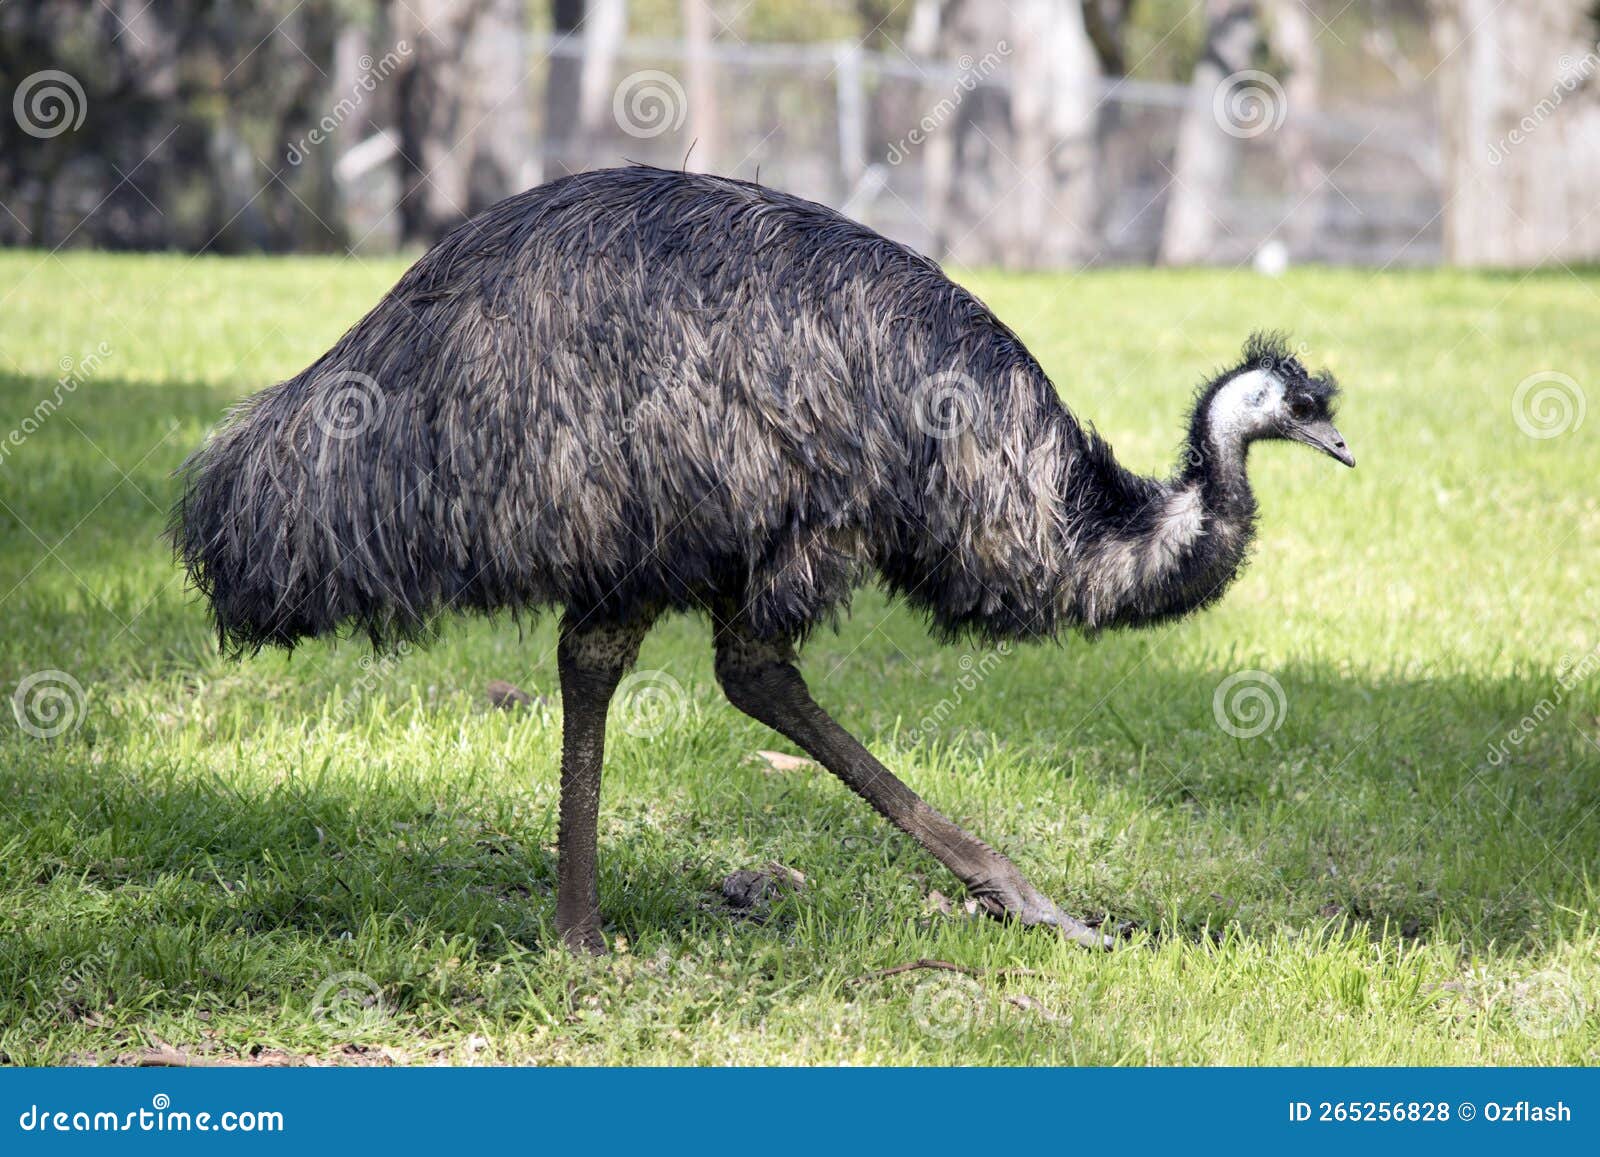 Grey And Brown Feathers Of An Emu Stock Photo - Download Image Now